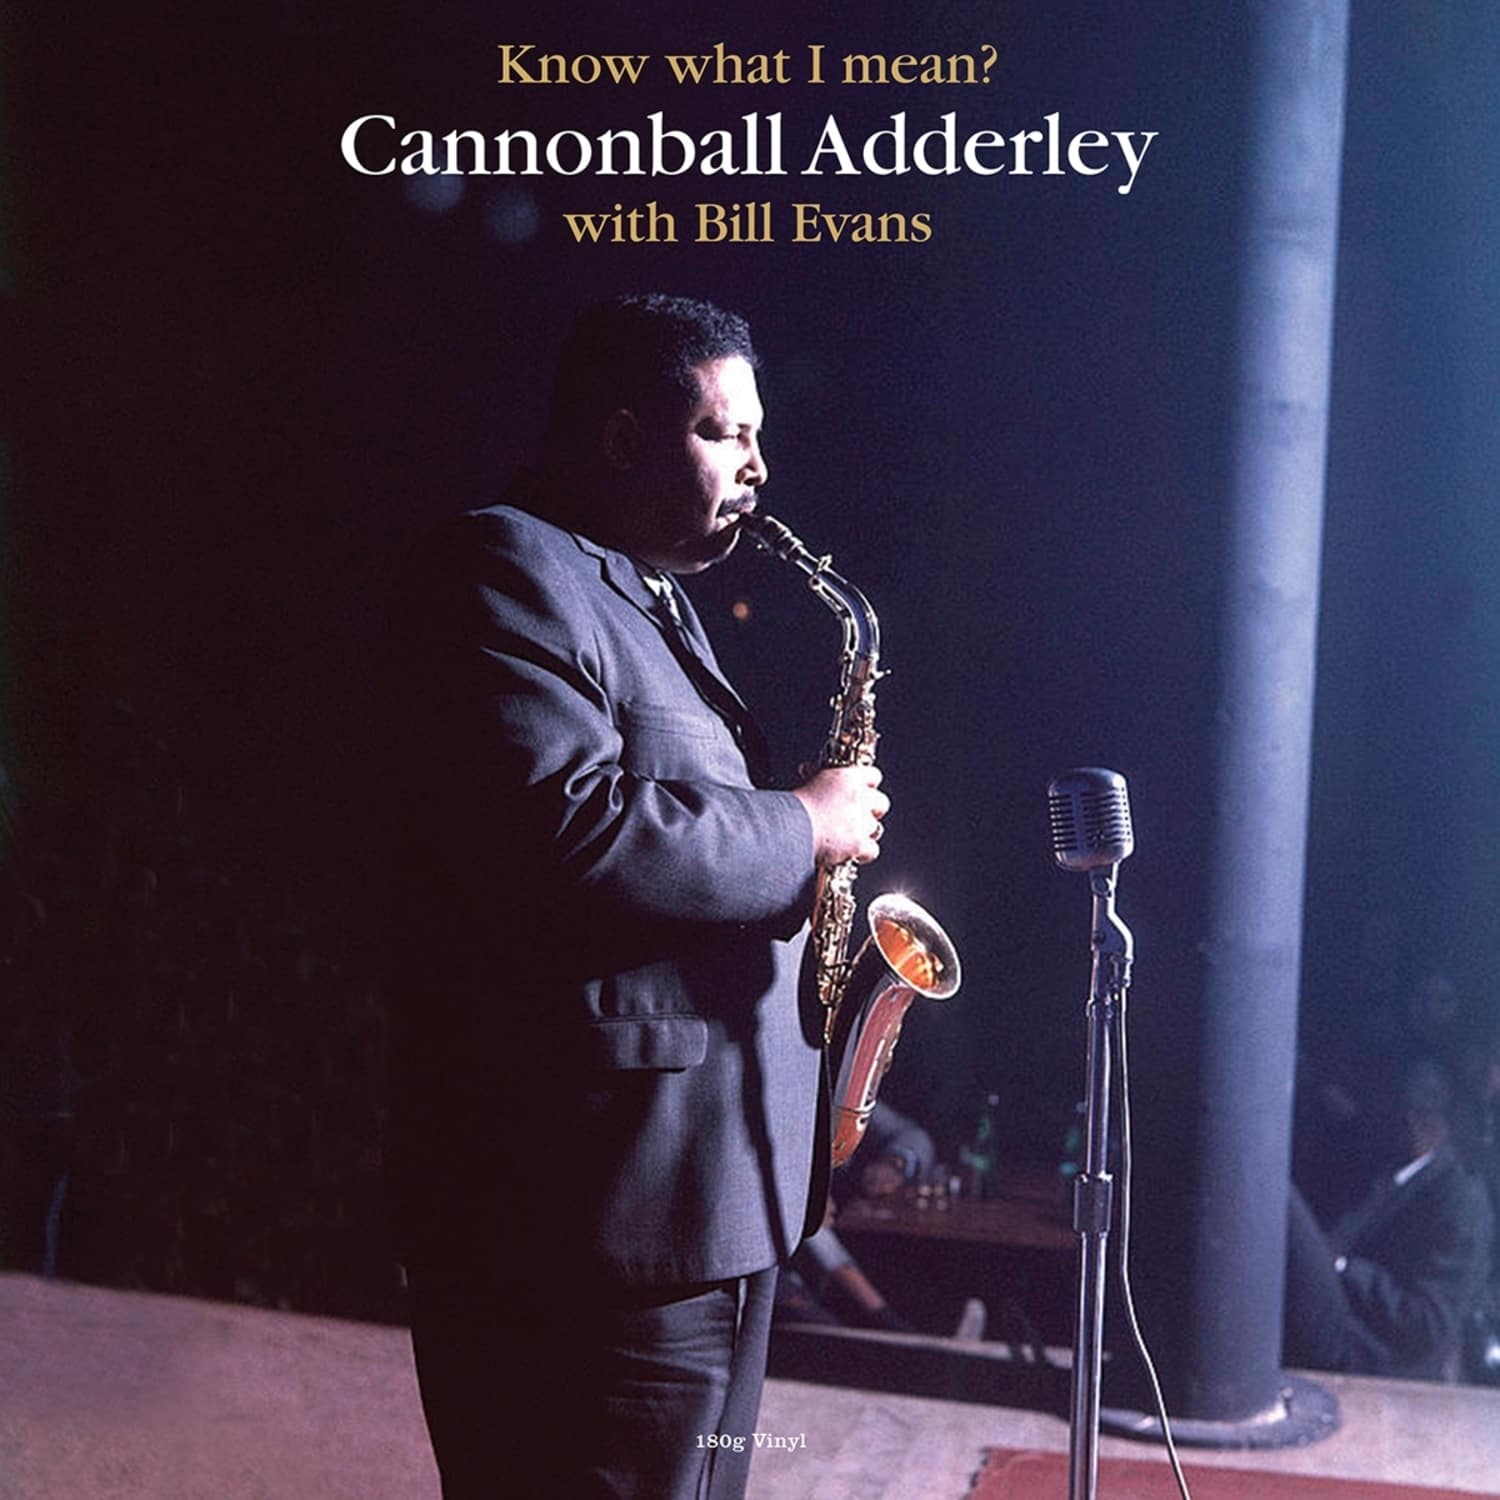  Cannonball Adderley & Bill Evans - KNOW WHAT I MEAN? 